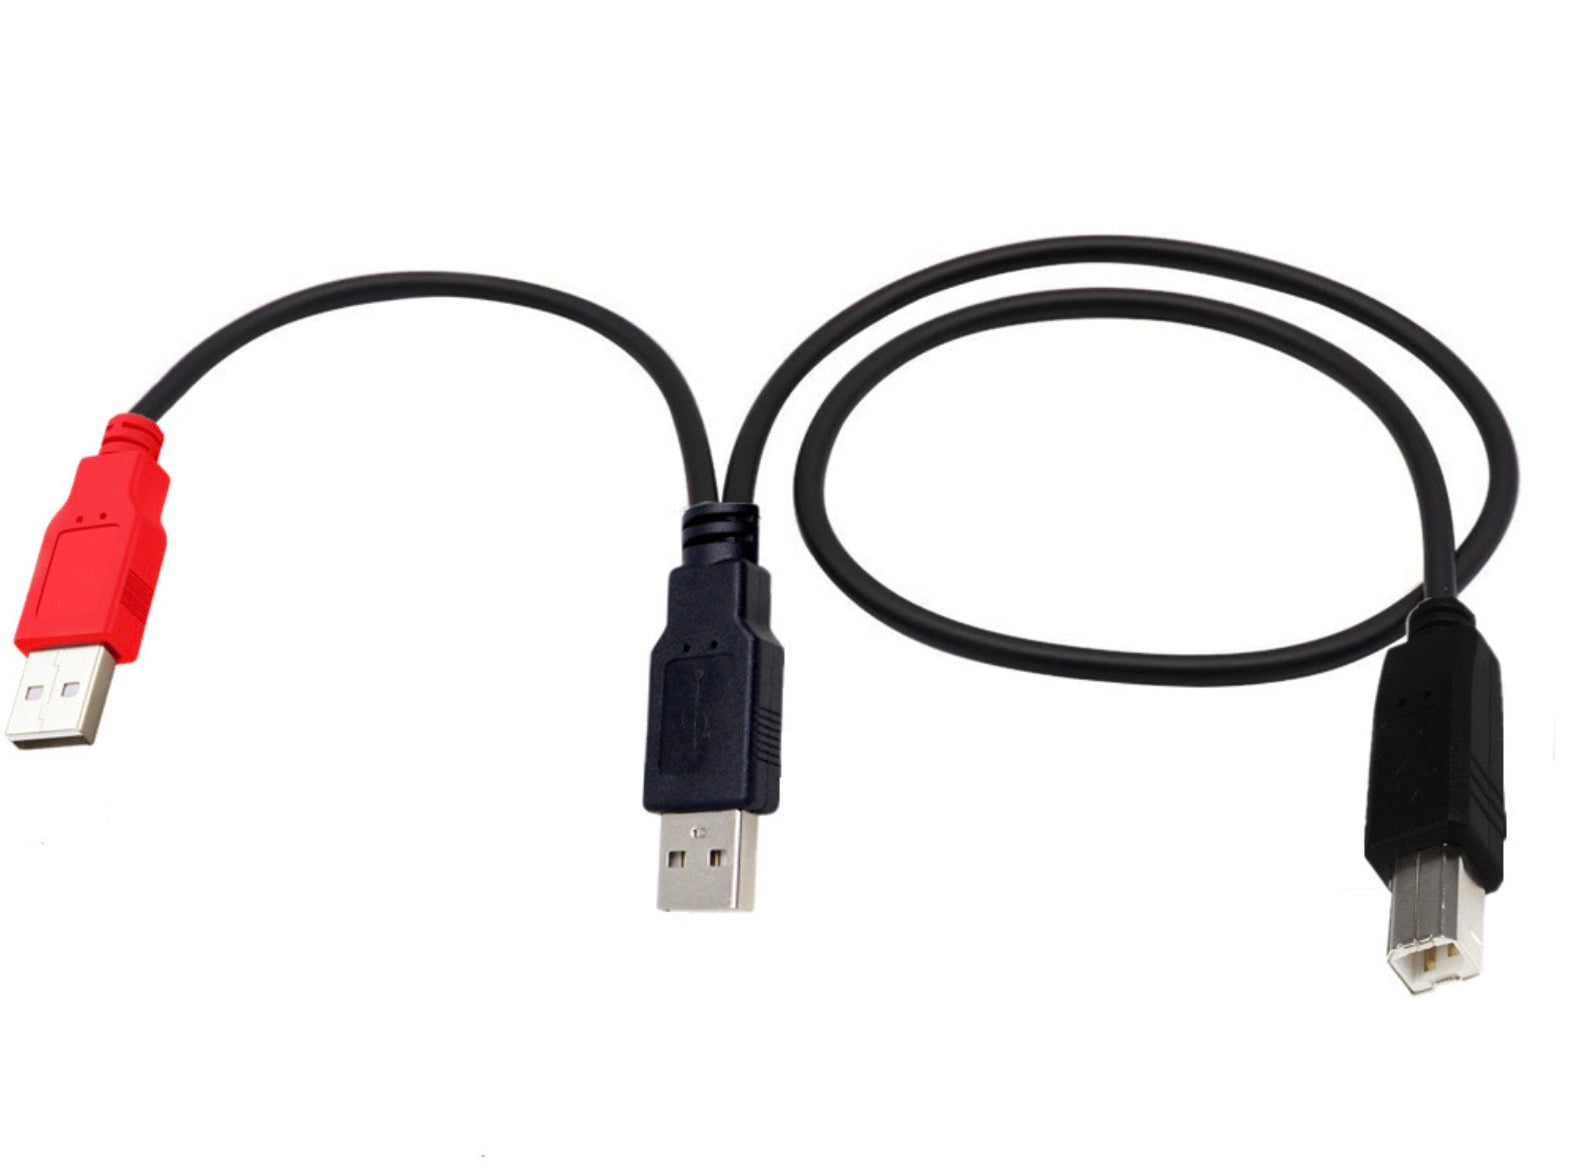 Dual USB 2.0 A Male to Standard B Male Y Cable With Extra Power 0.8m